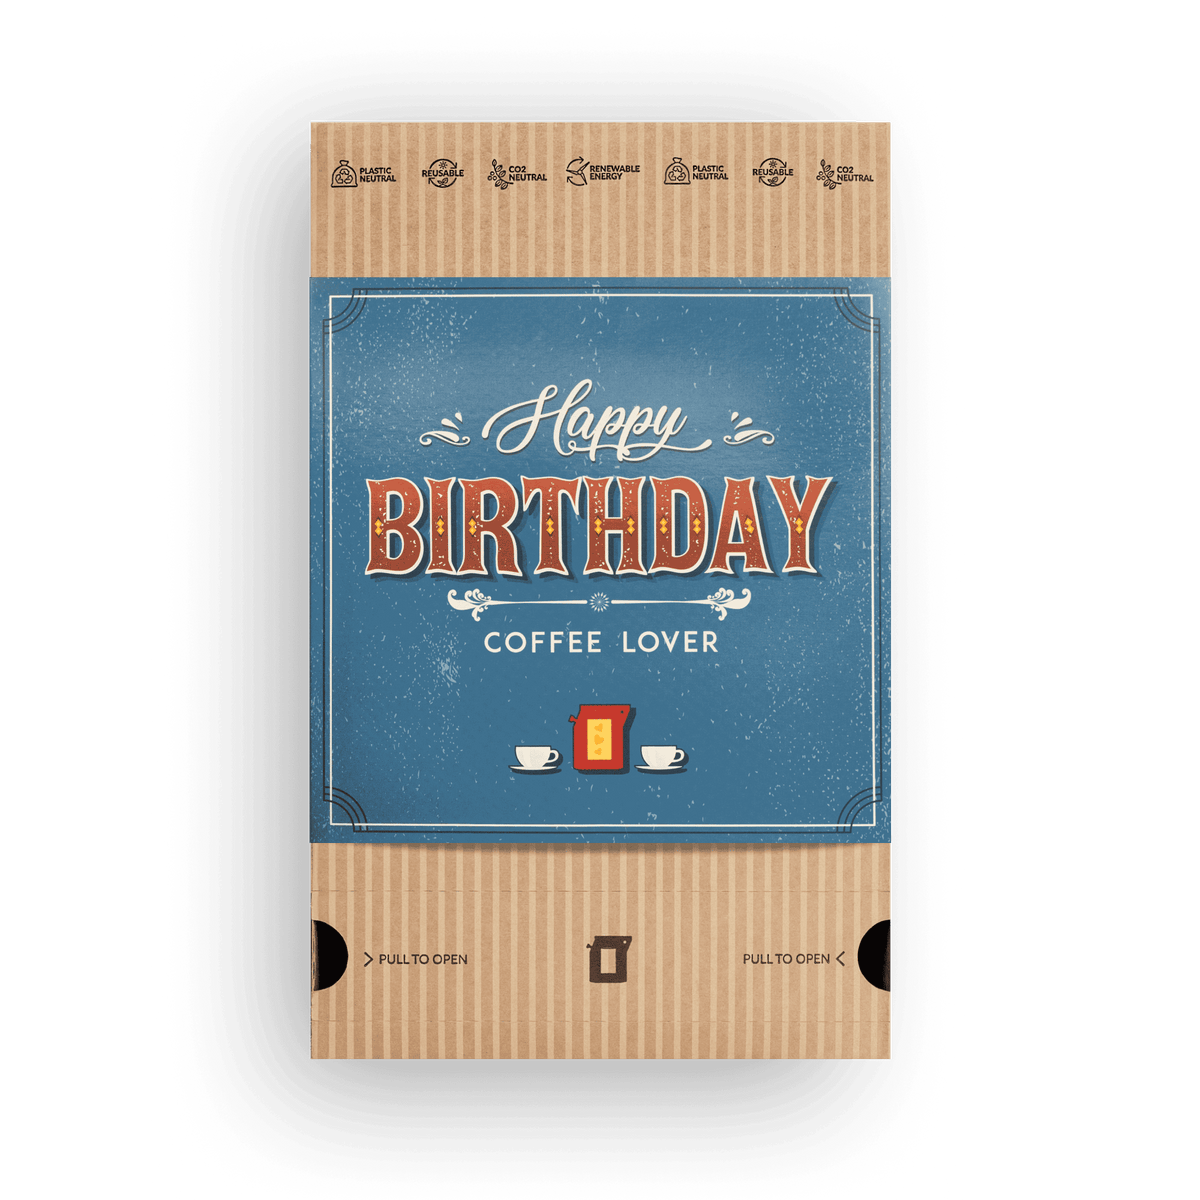 HAPPY BIRTHDAY COFFEE GIFT BOX - Gift Boxes | The Brew Company